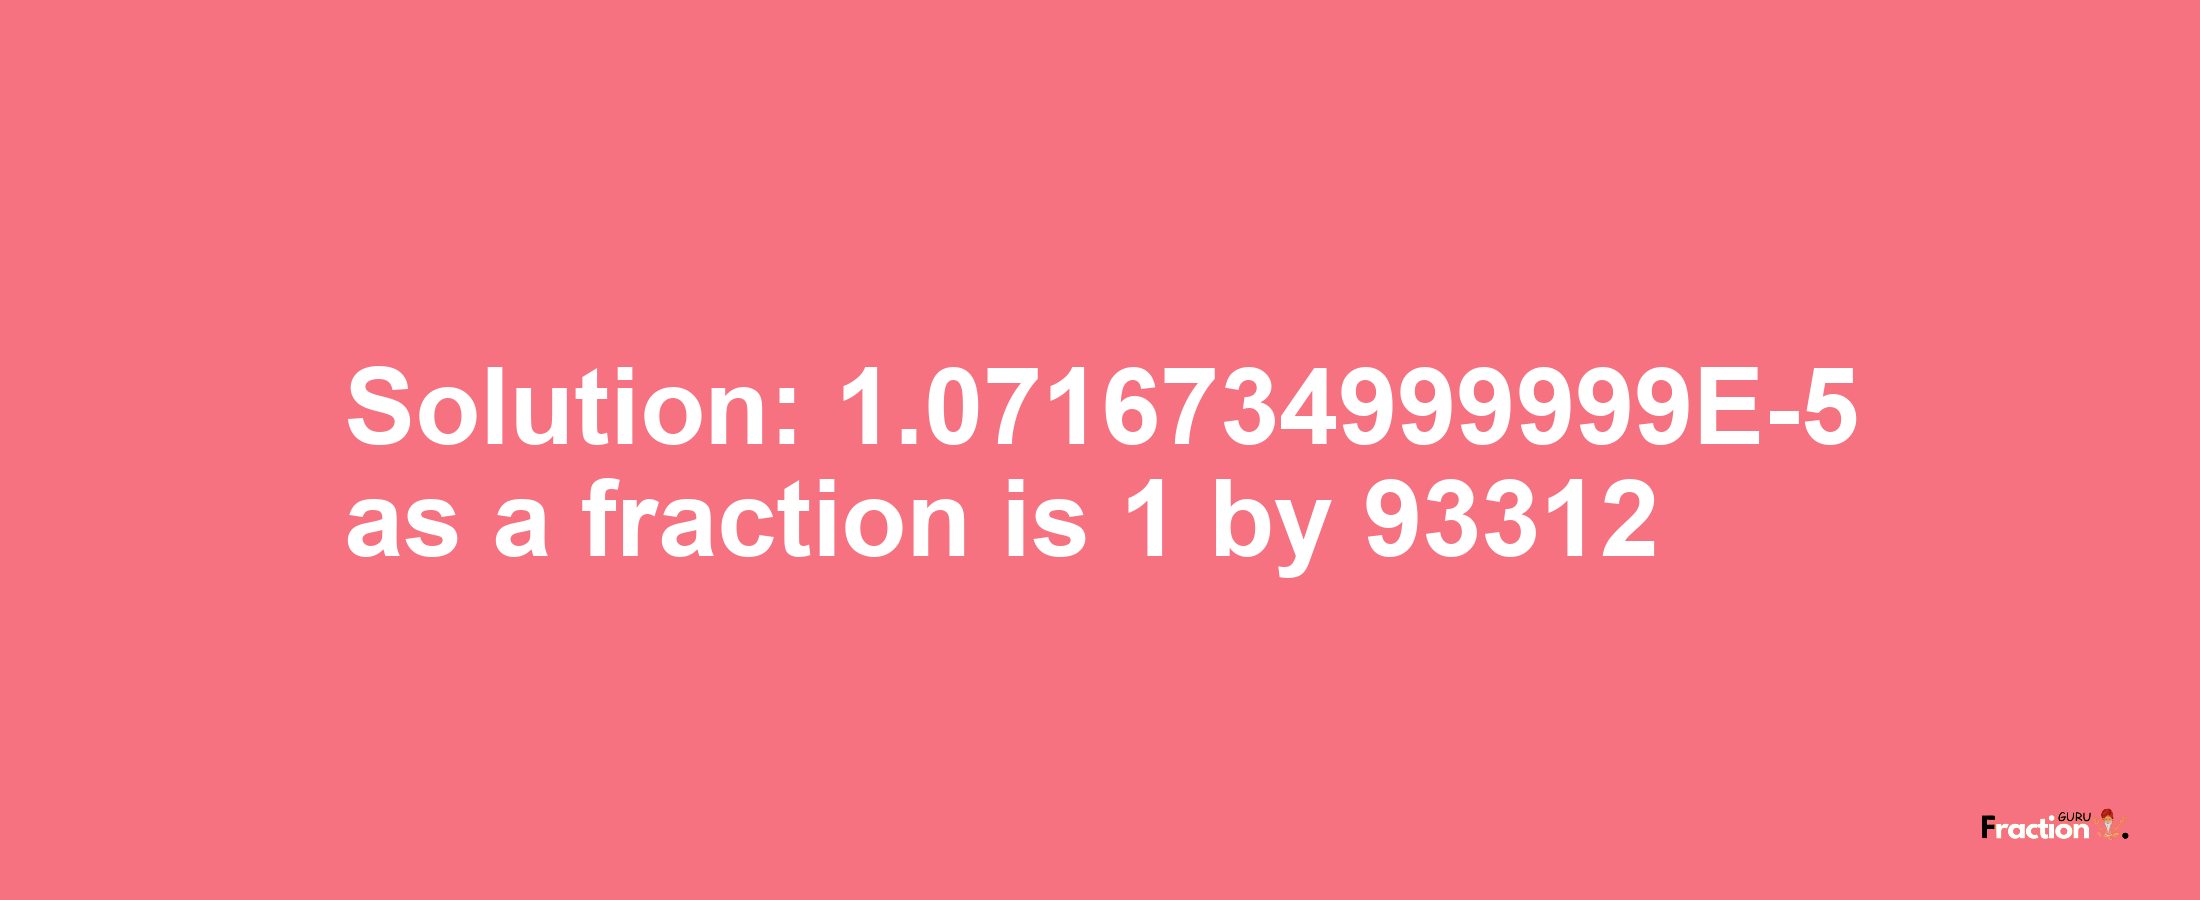 Solution:1.0716734999999E-5 as a fraction is 1/93312